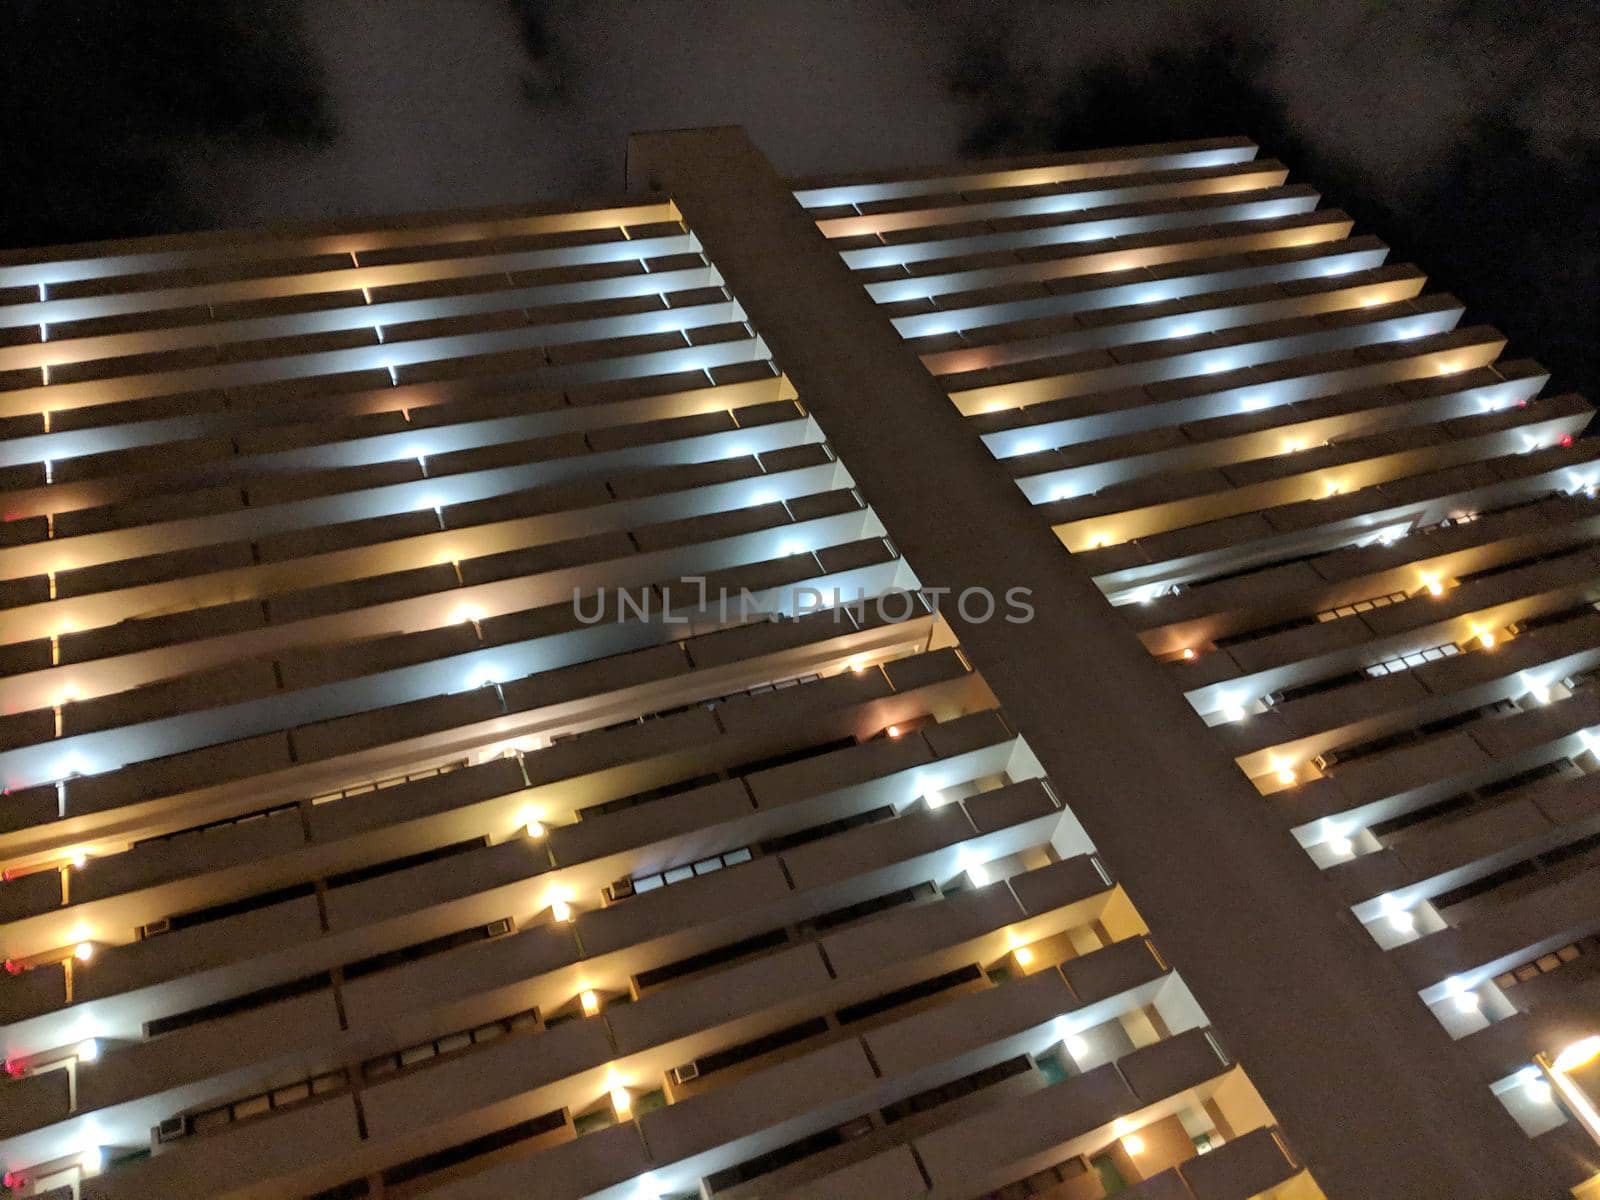 Honolulu - October 24, 2018: Looking up a Condo Building with outdoor hallway at Night.